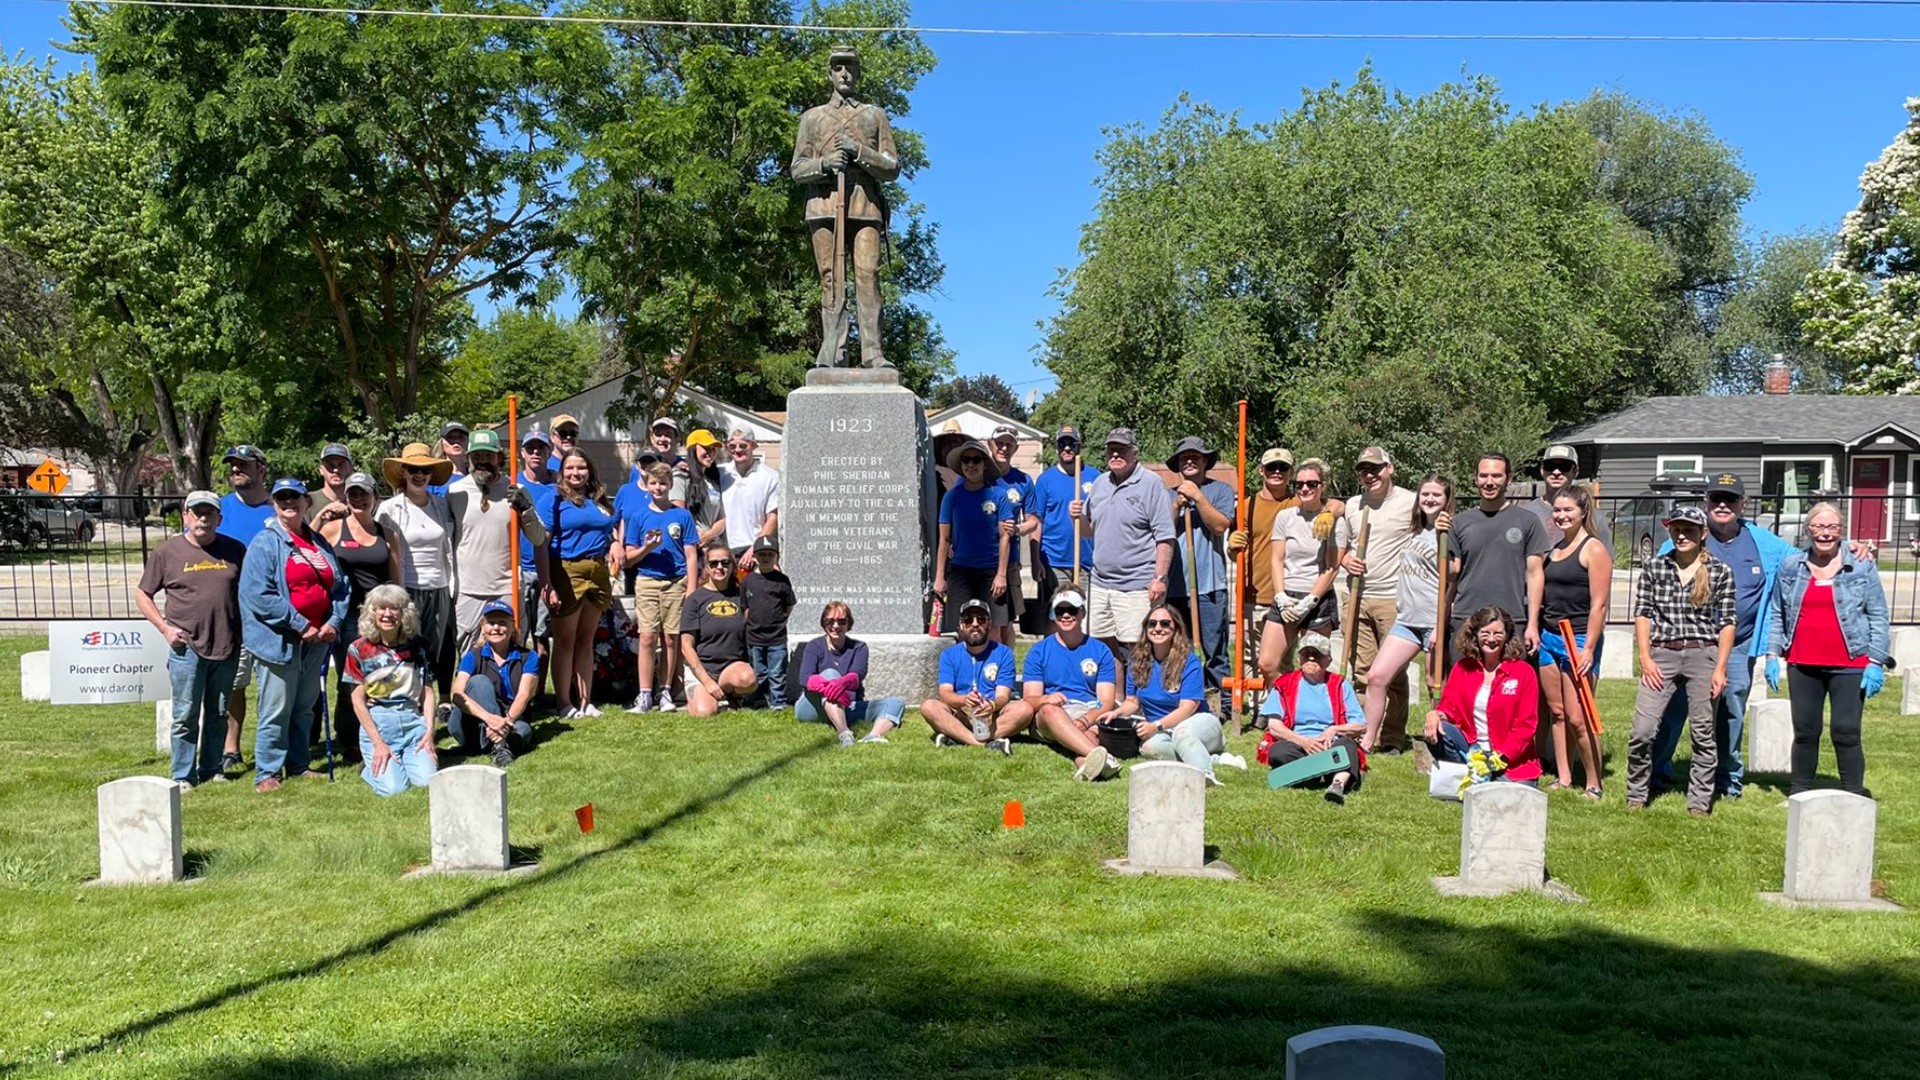 On Saturday, members of the KTVB family and volunteers from across the Treasure Valley and Idaho participated in helpful activities in Larry's honor.